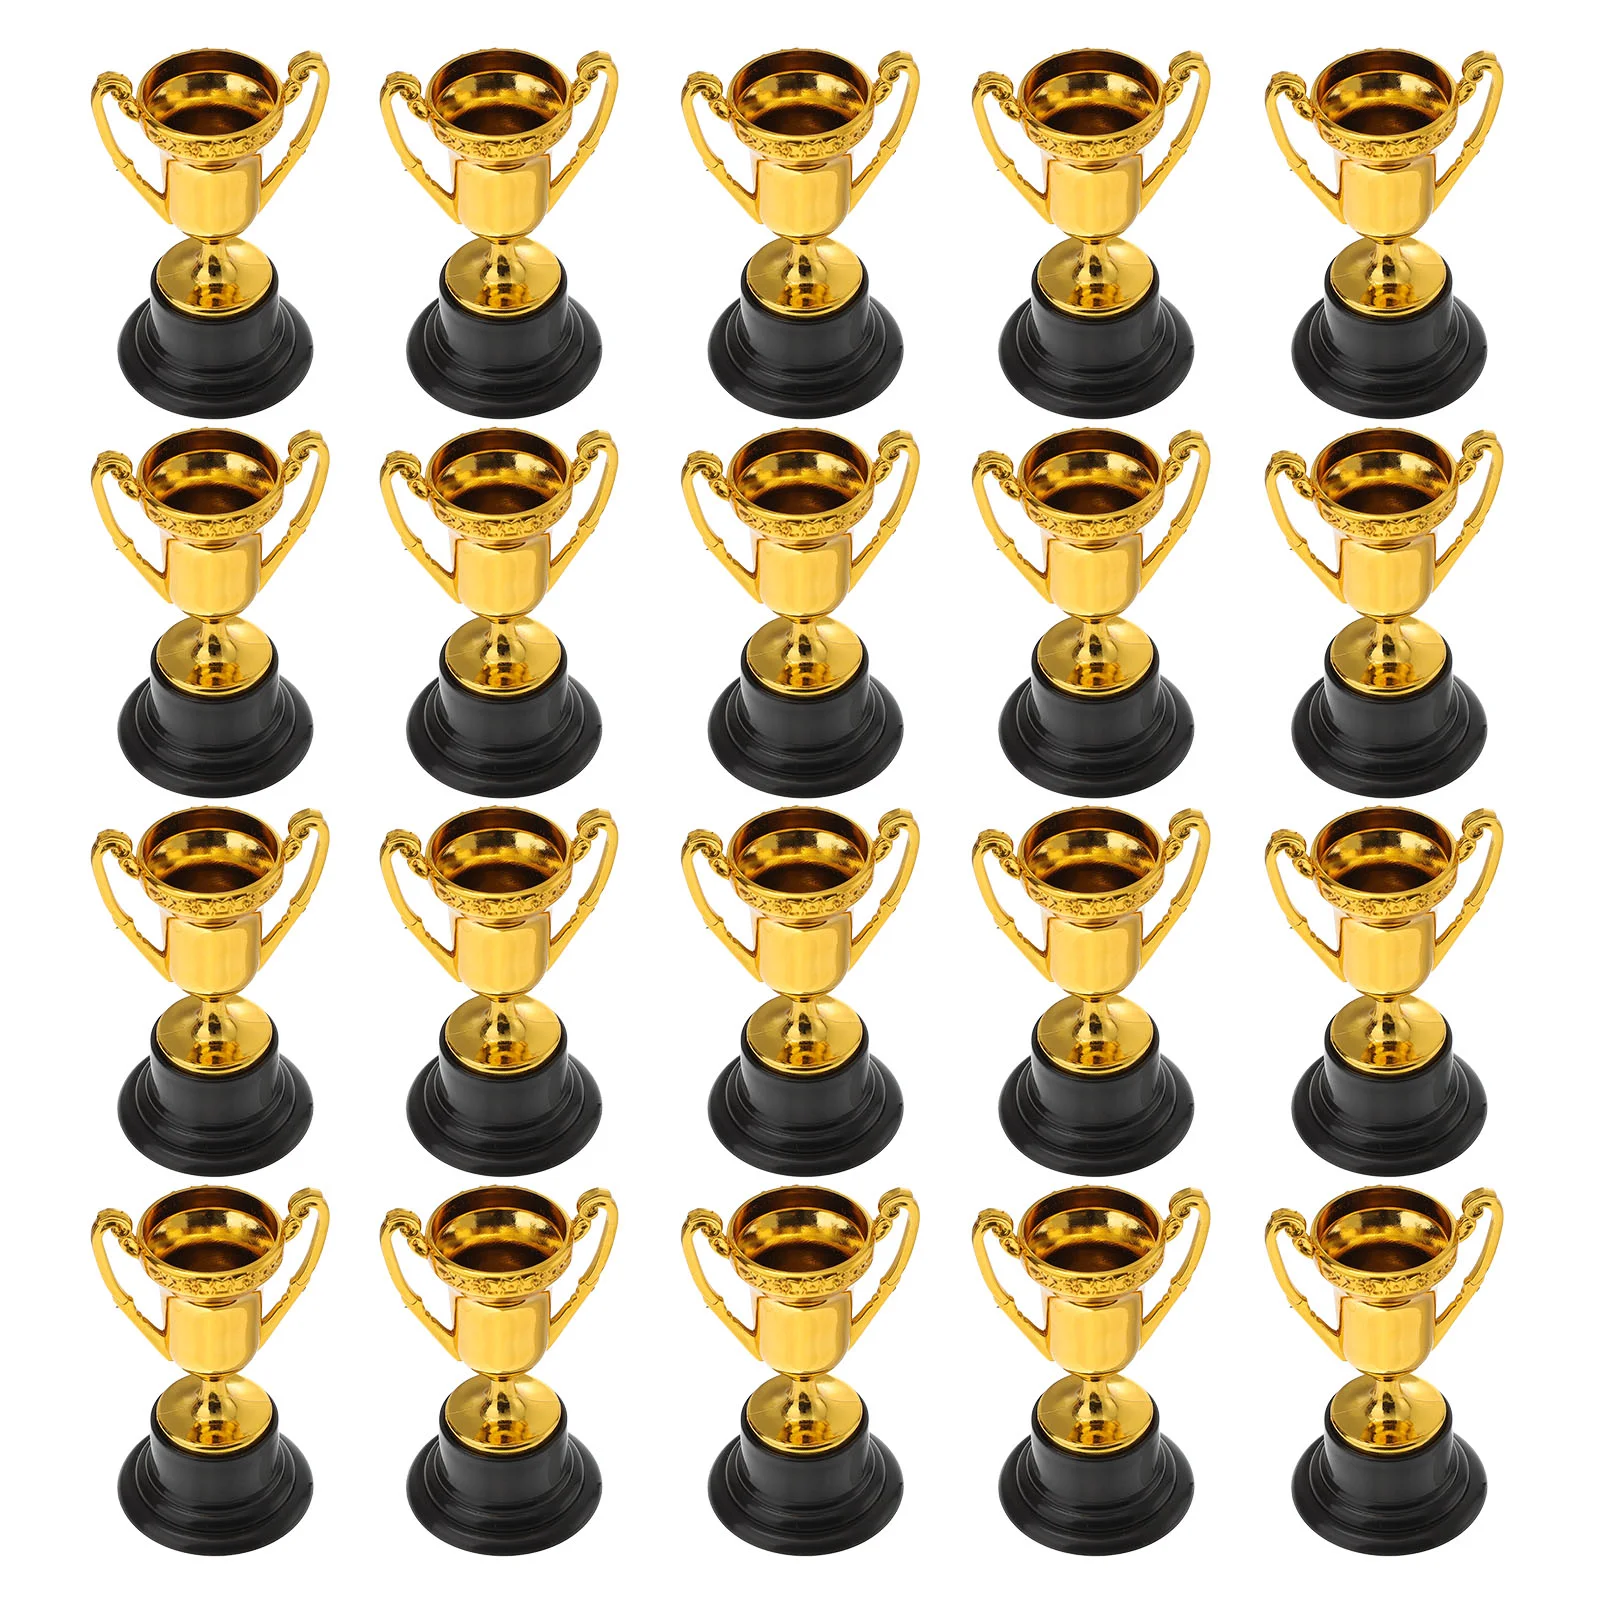 Award Ceremony Trophy Kids Party Championship Cup Sports Toys Miniture Small Prize Gifts for Stocking Stuffers